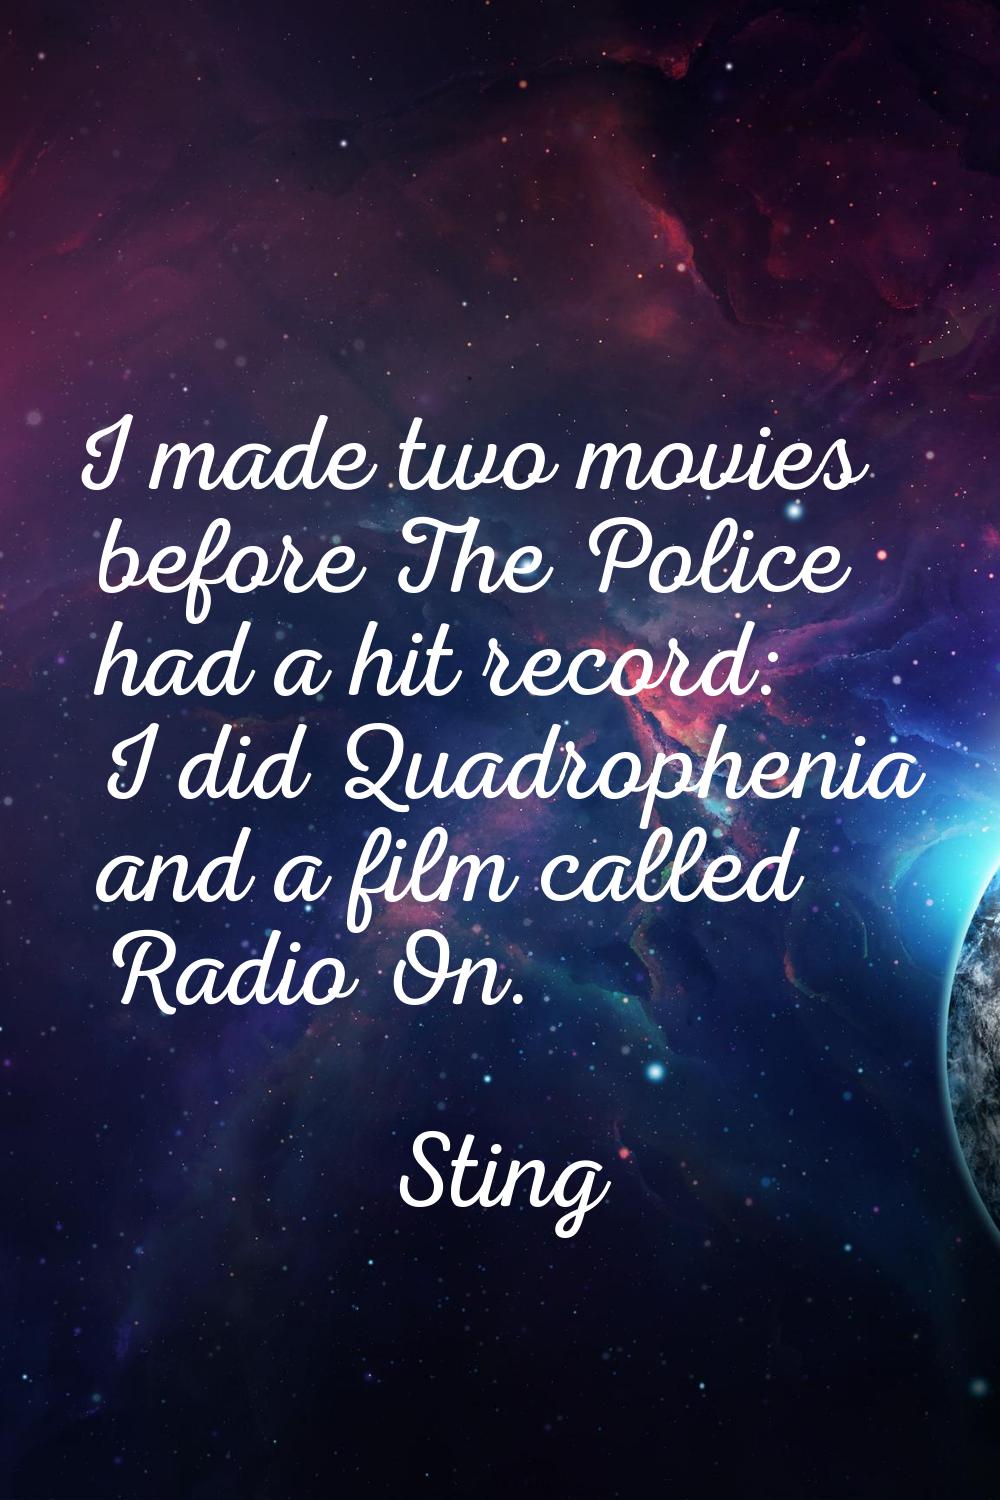 I made two movies before The Police had a hit record: I did Quadrophenia and a film called Radio On